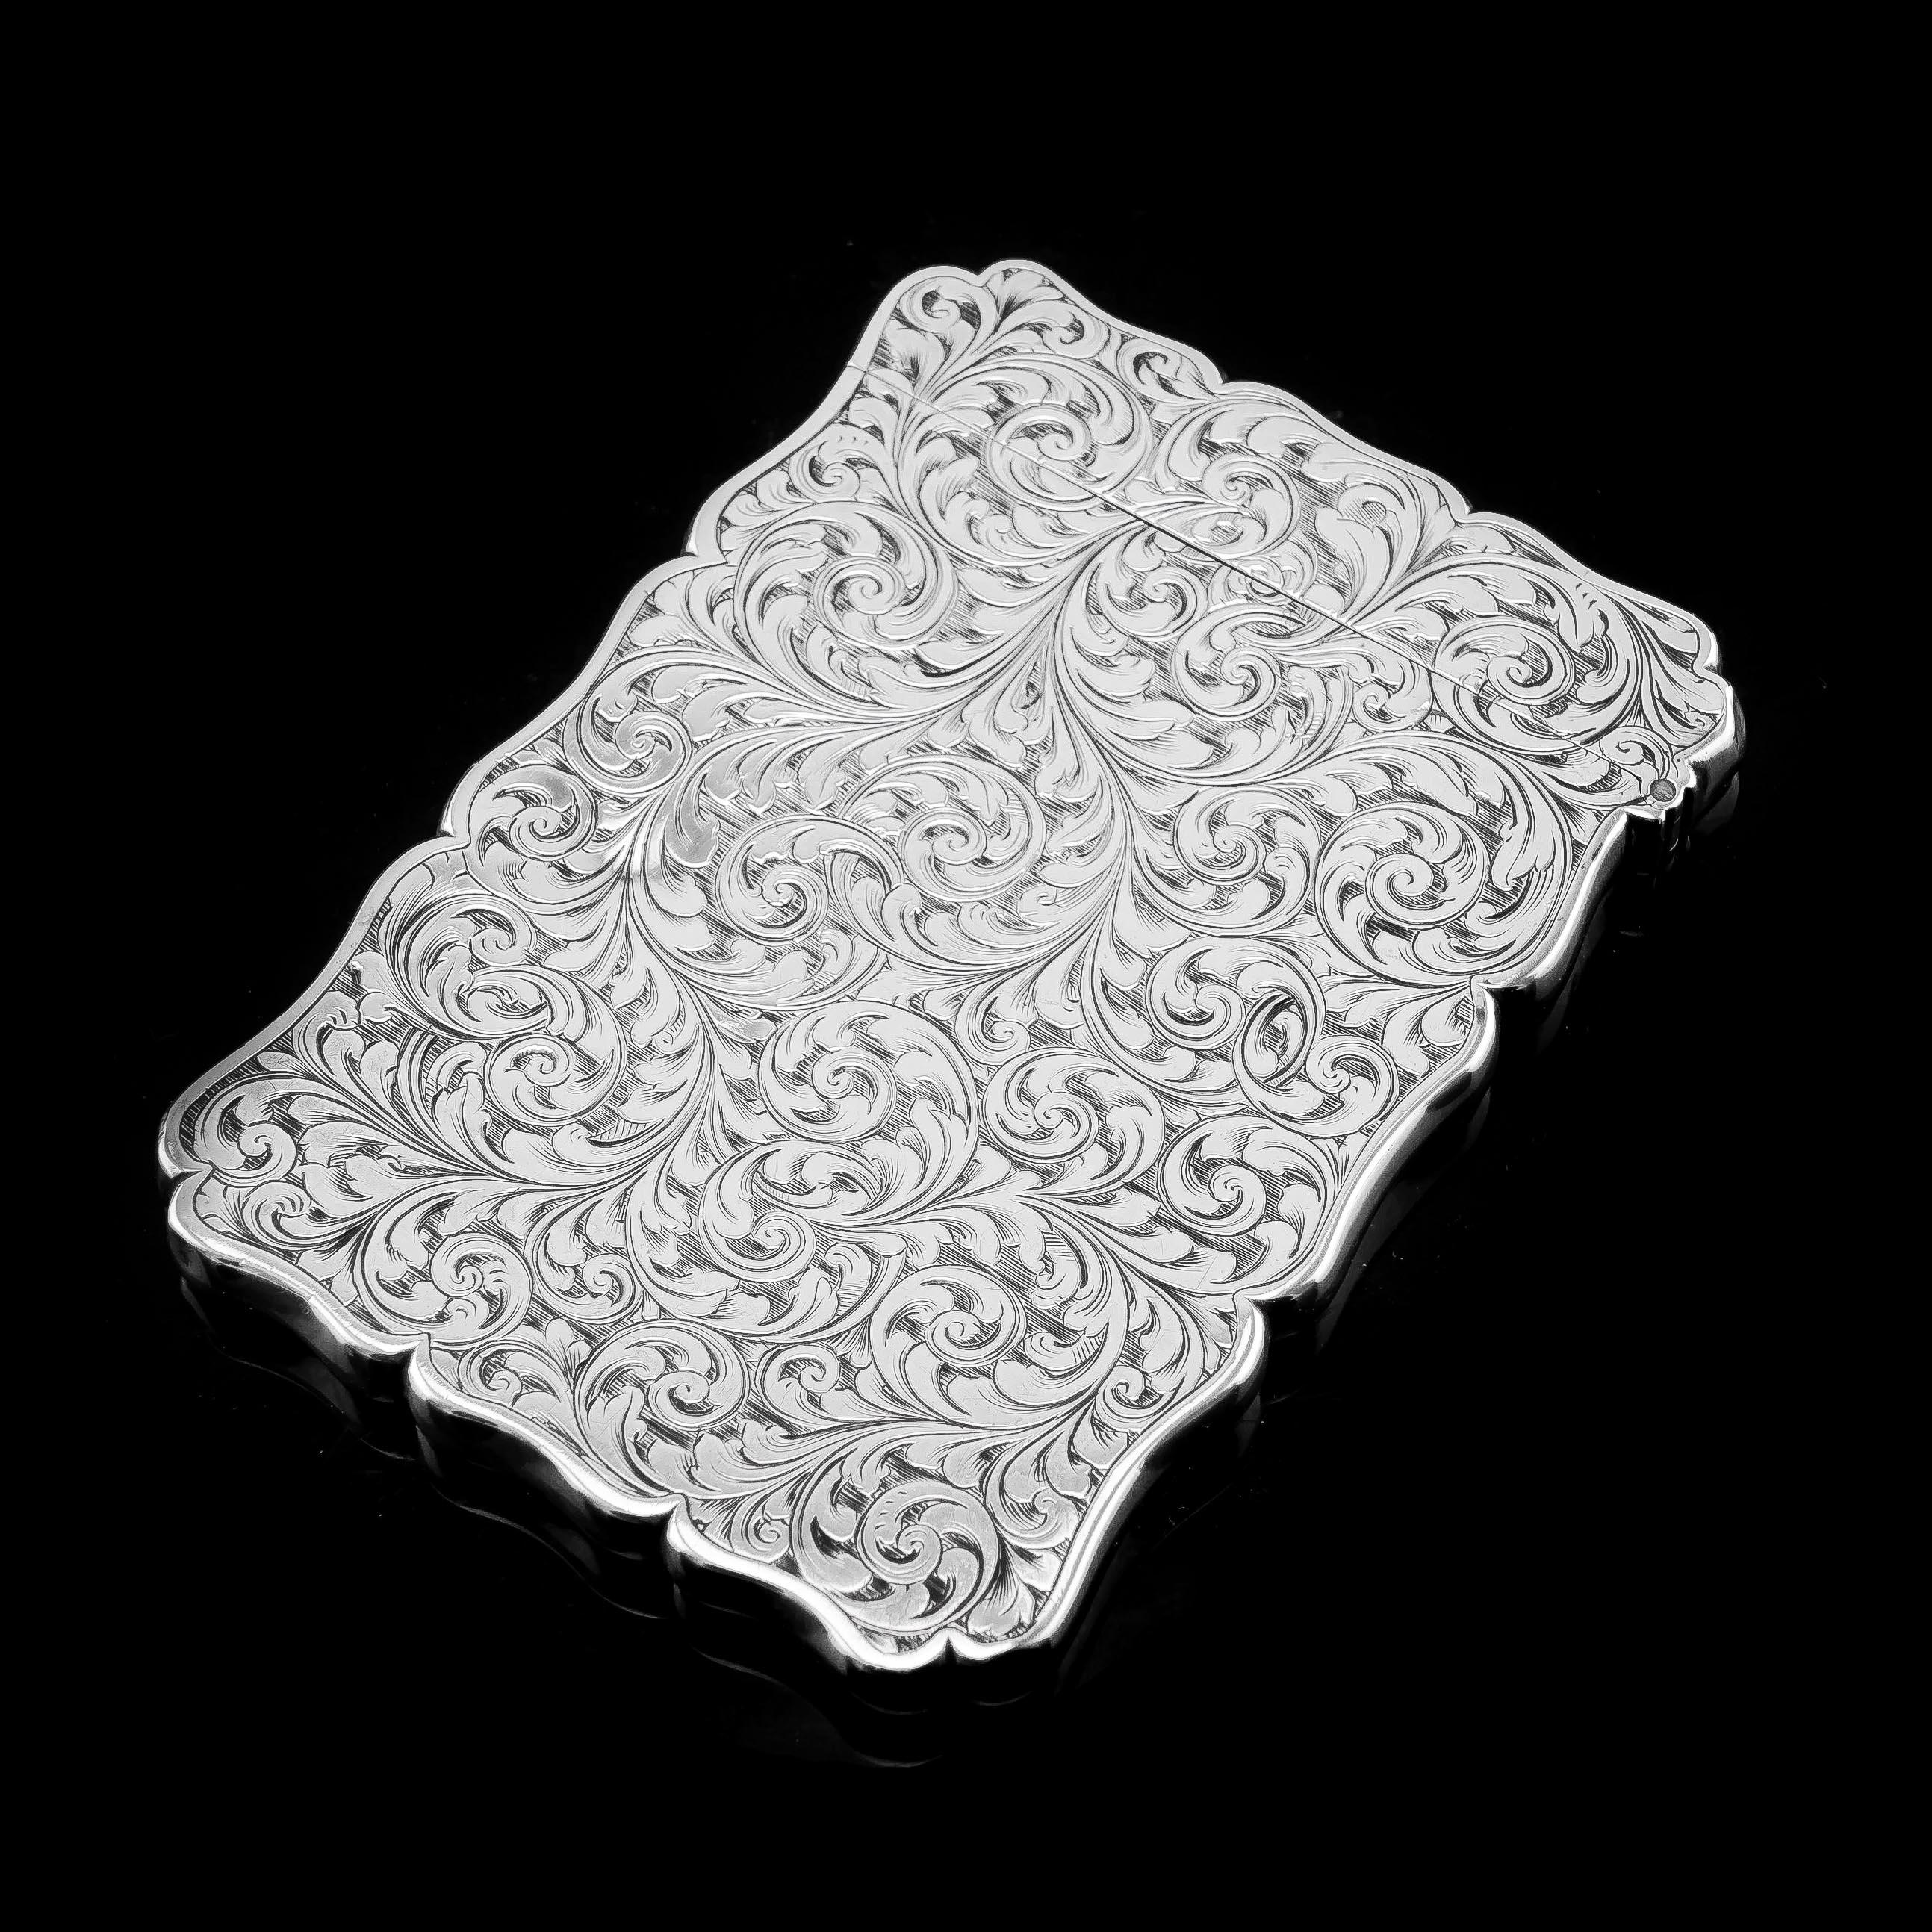 Antique Solid Silver Card Case Engraved Acanthus Motif, Edward Smith, 1862 For Sale 6